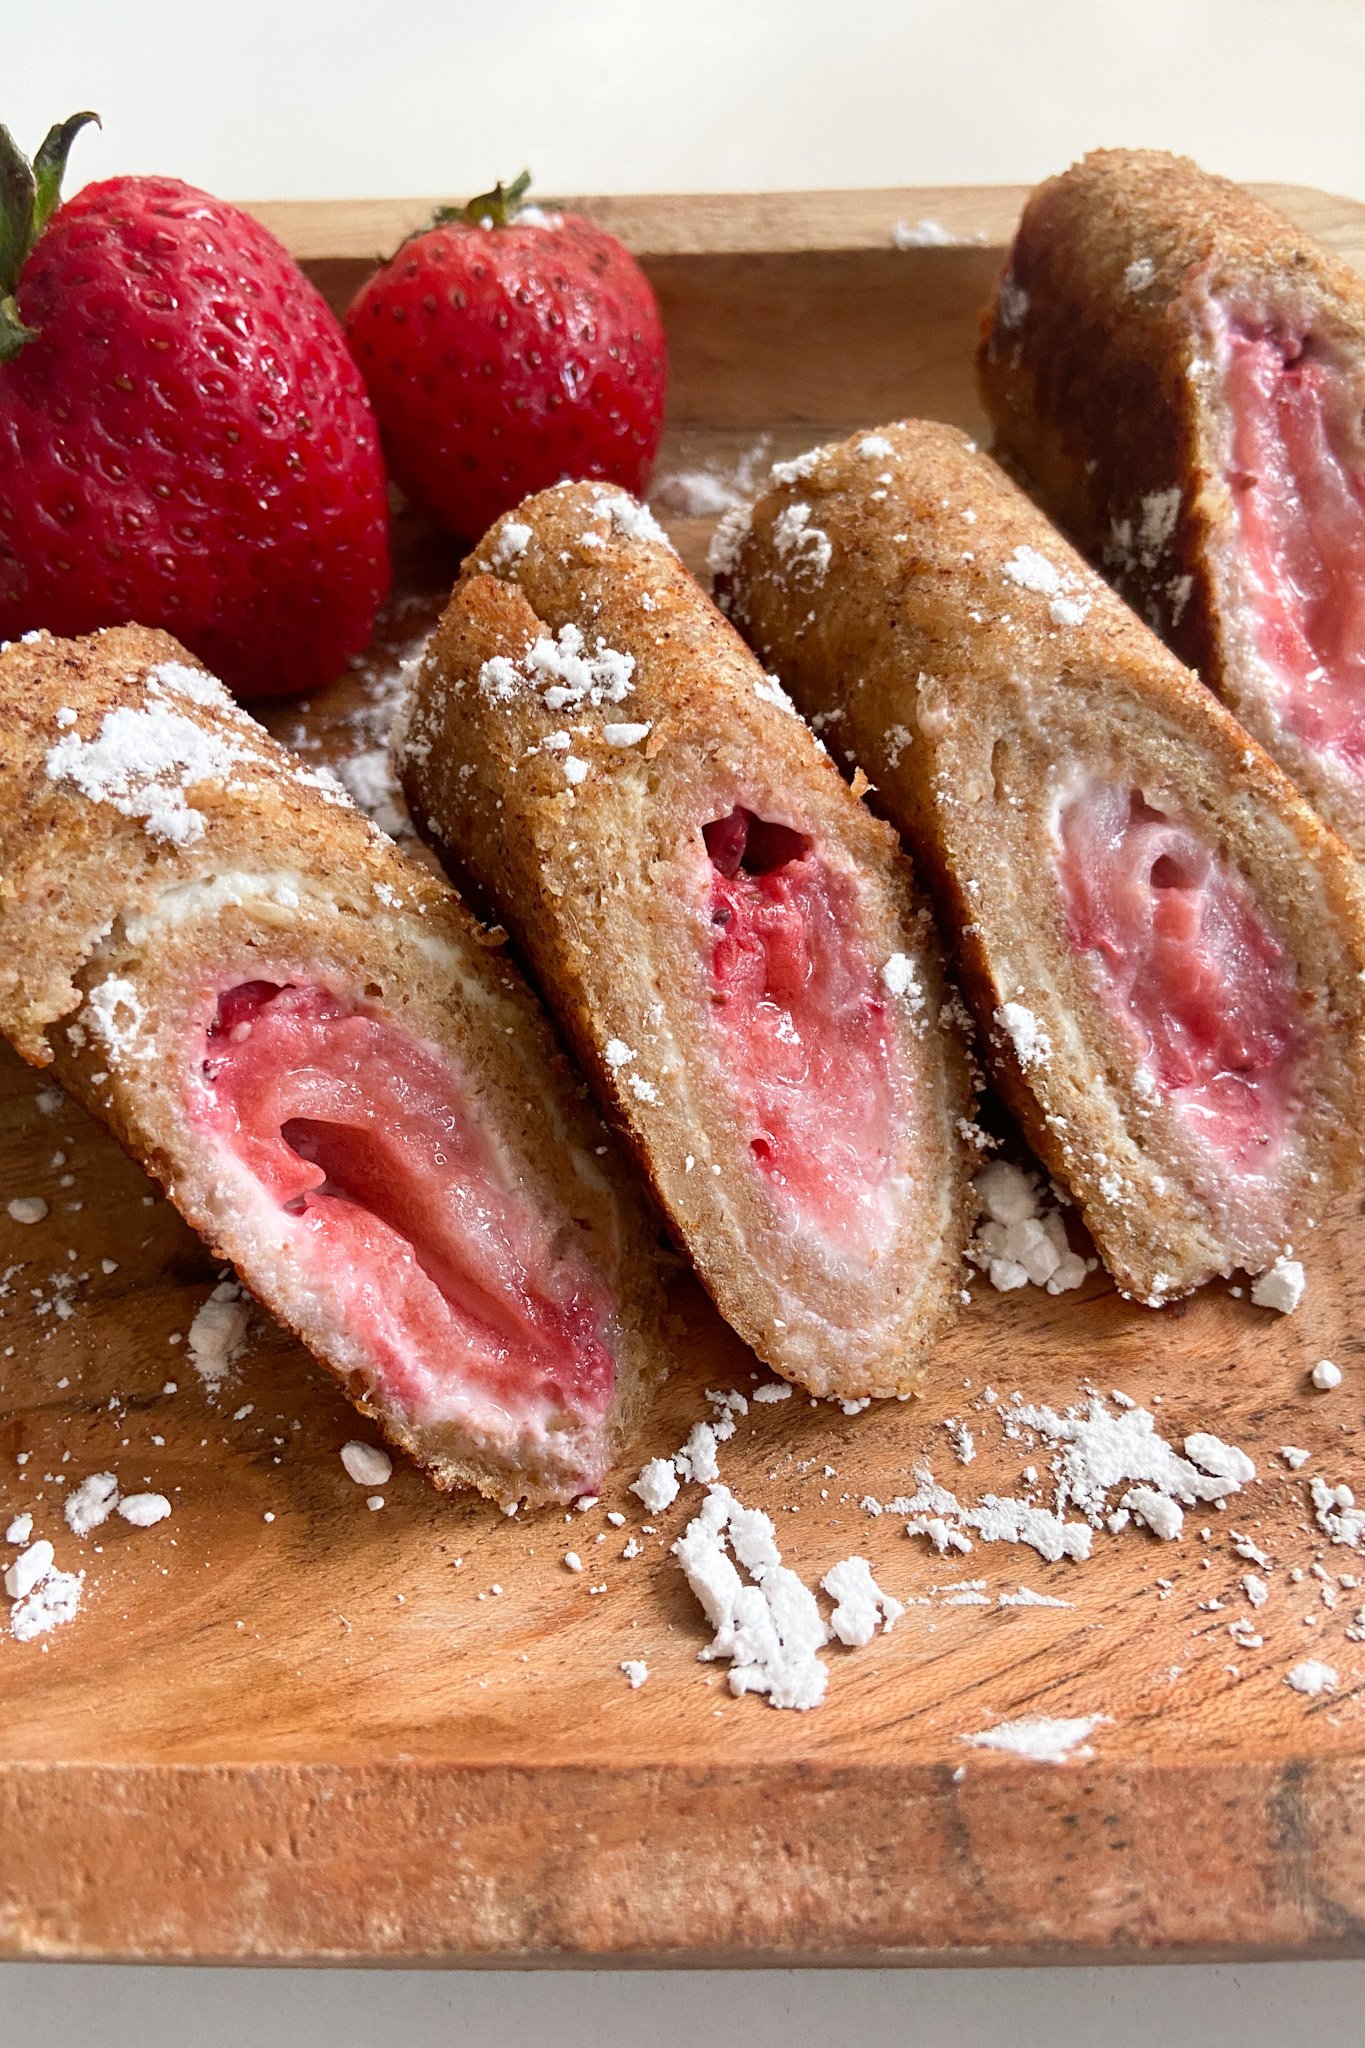 Strawberry cheesecake rollups dusted with powdered sugar